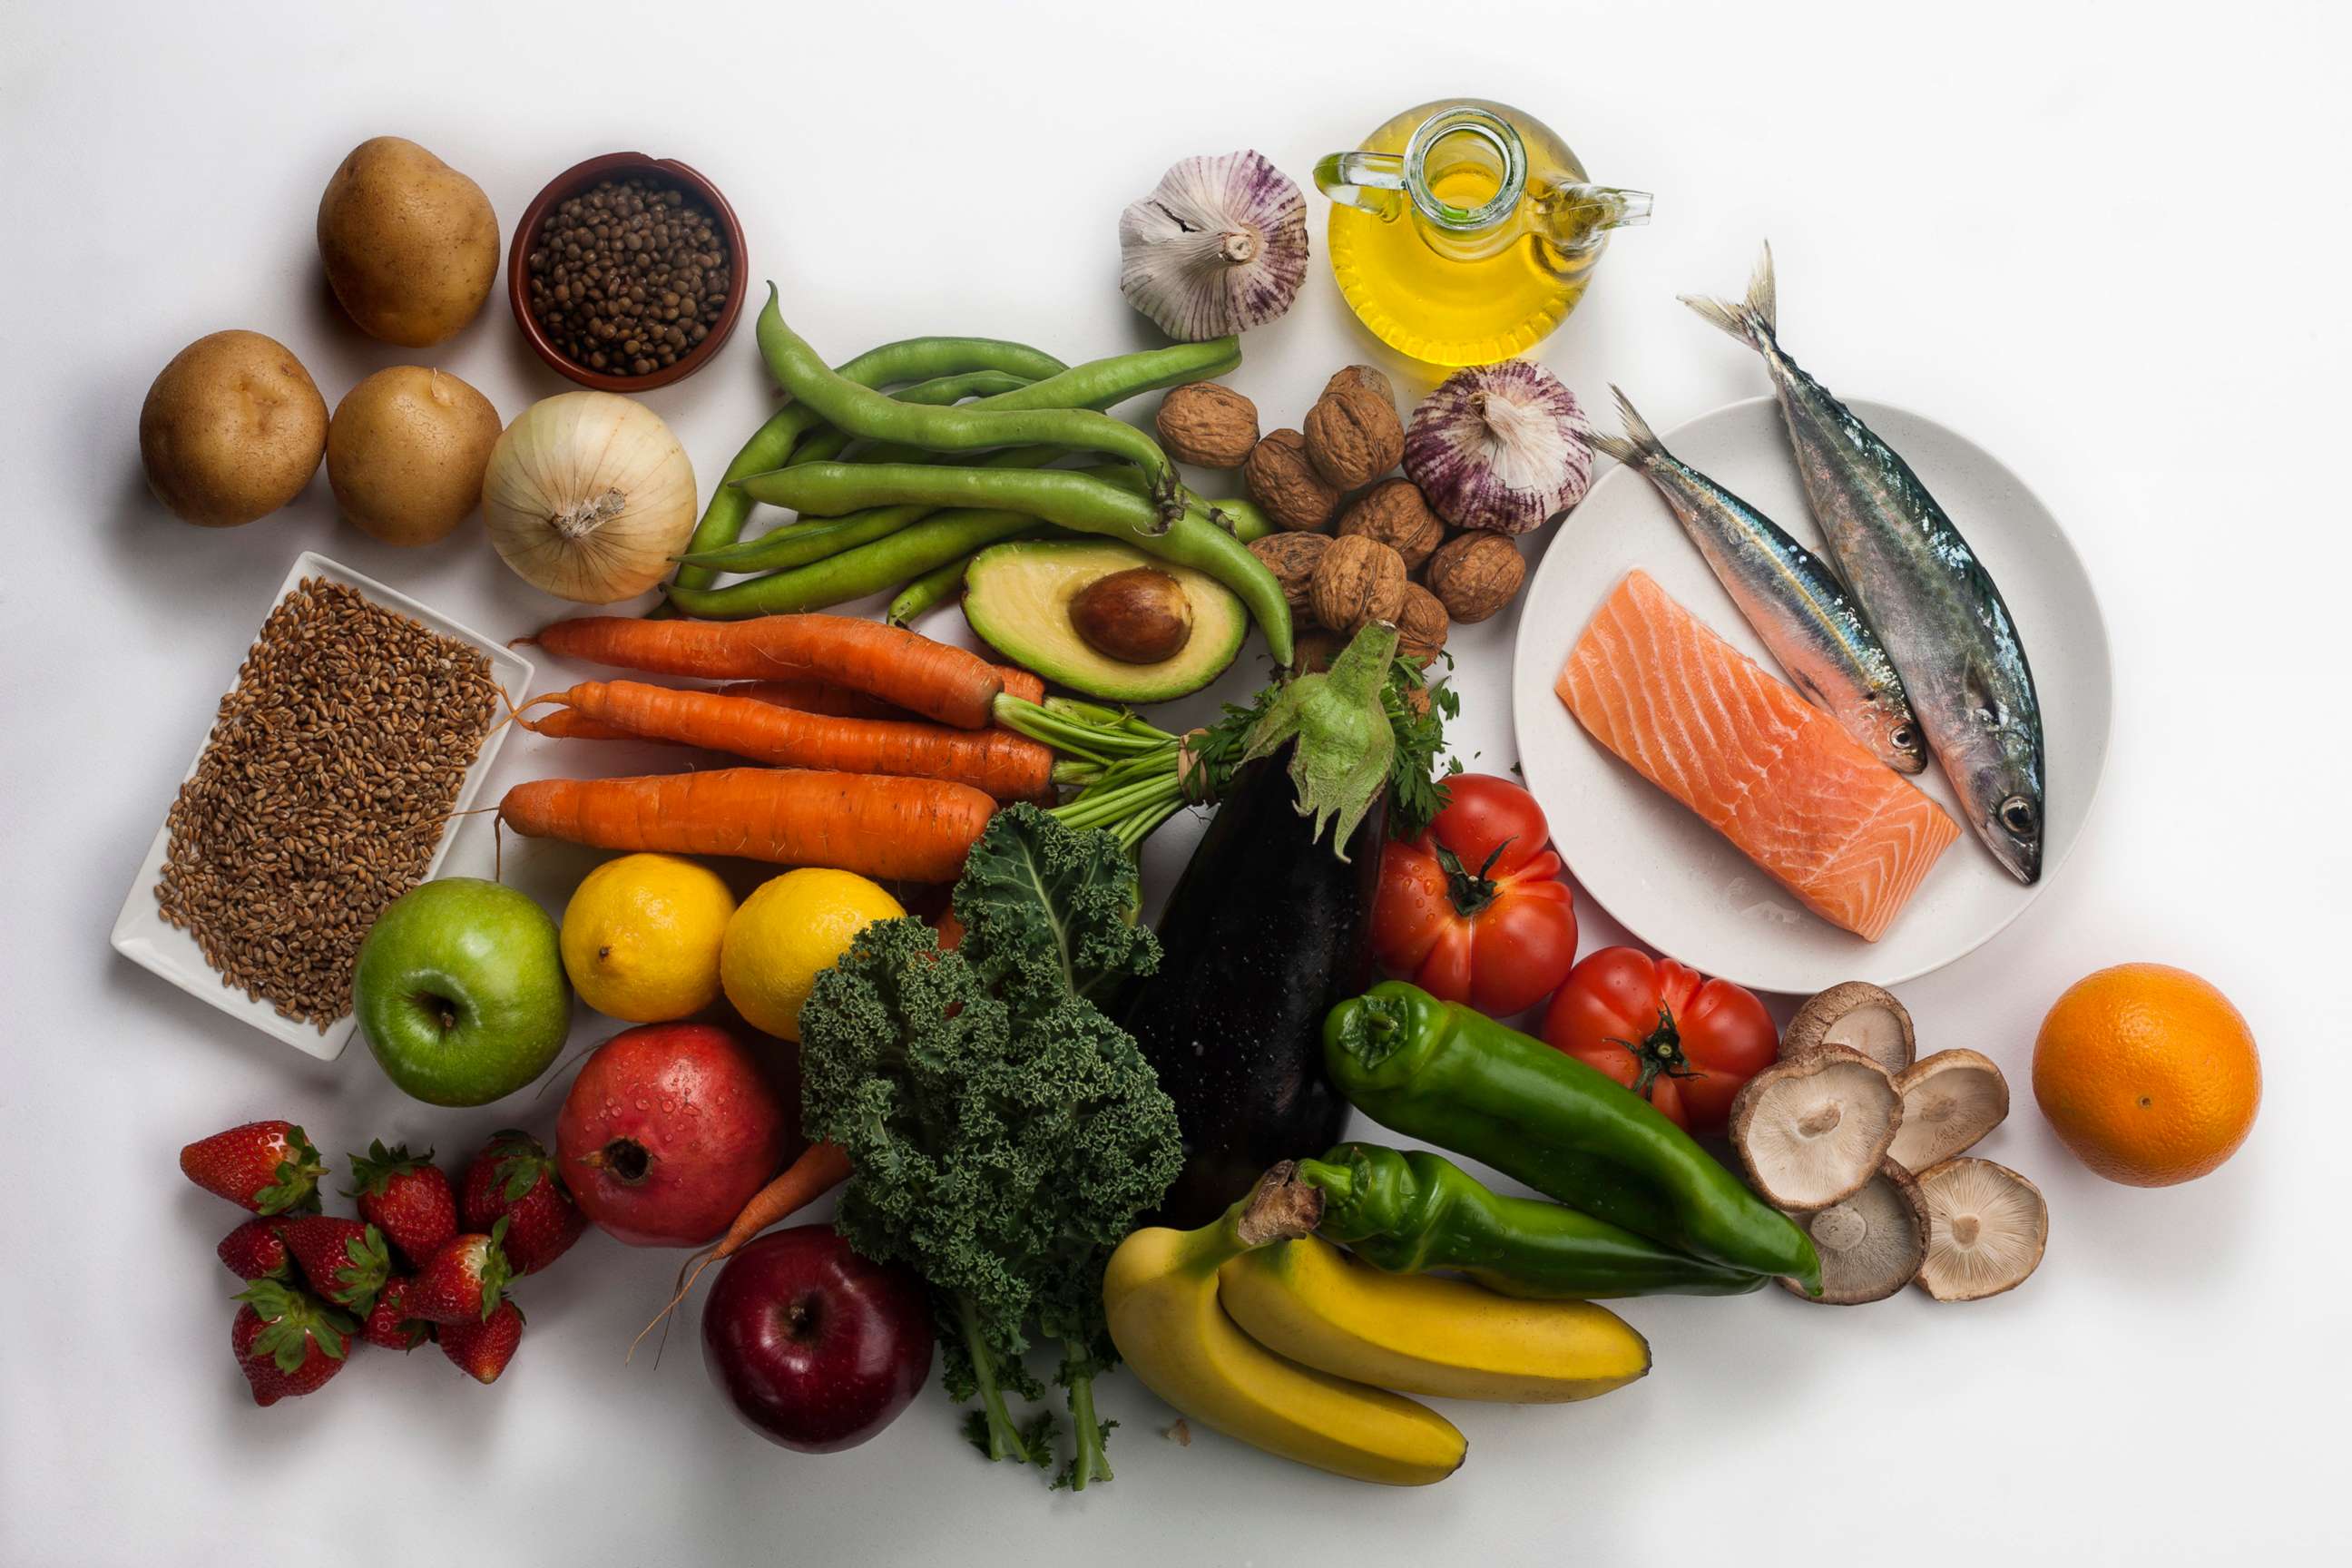 PHOTO: Vegetables, fruits, beans, nuts, whole grains, fish and olive oil make up the majority of a Mediterranean diet.